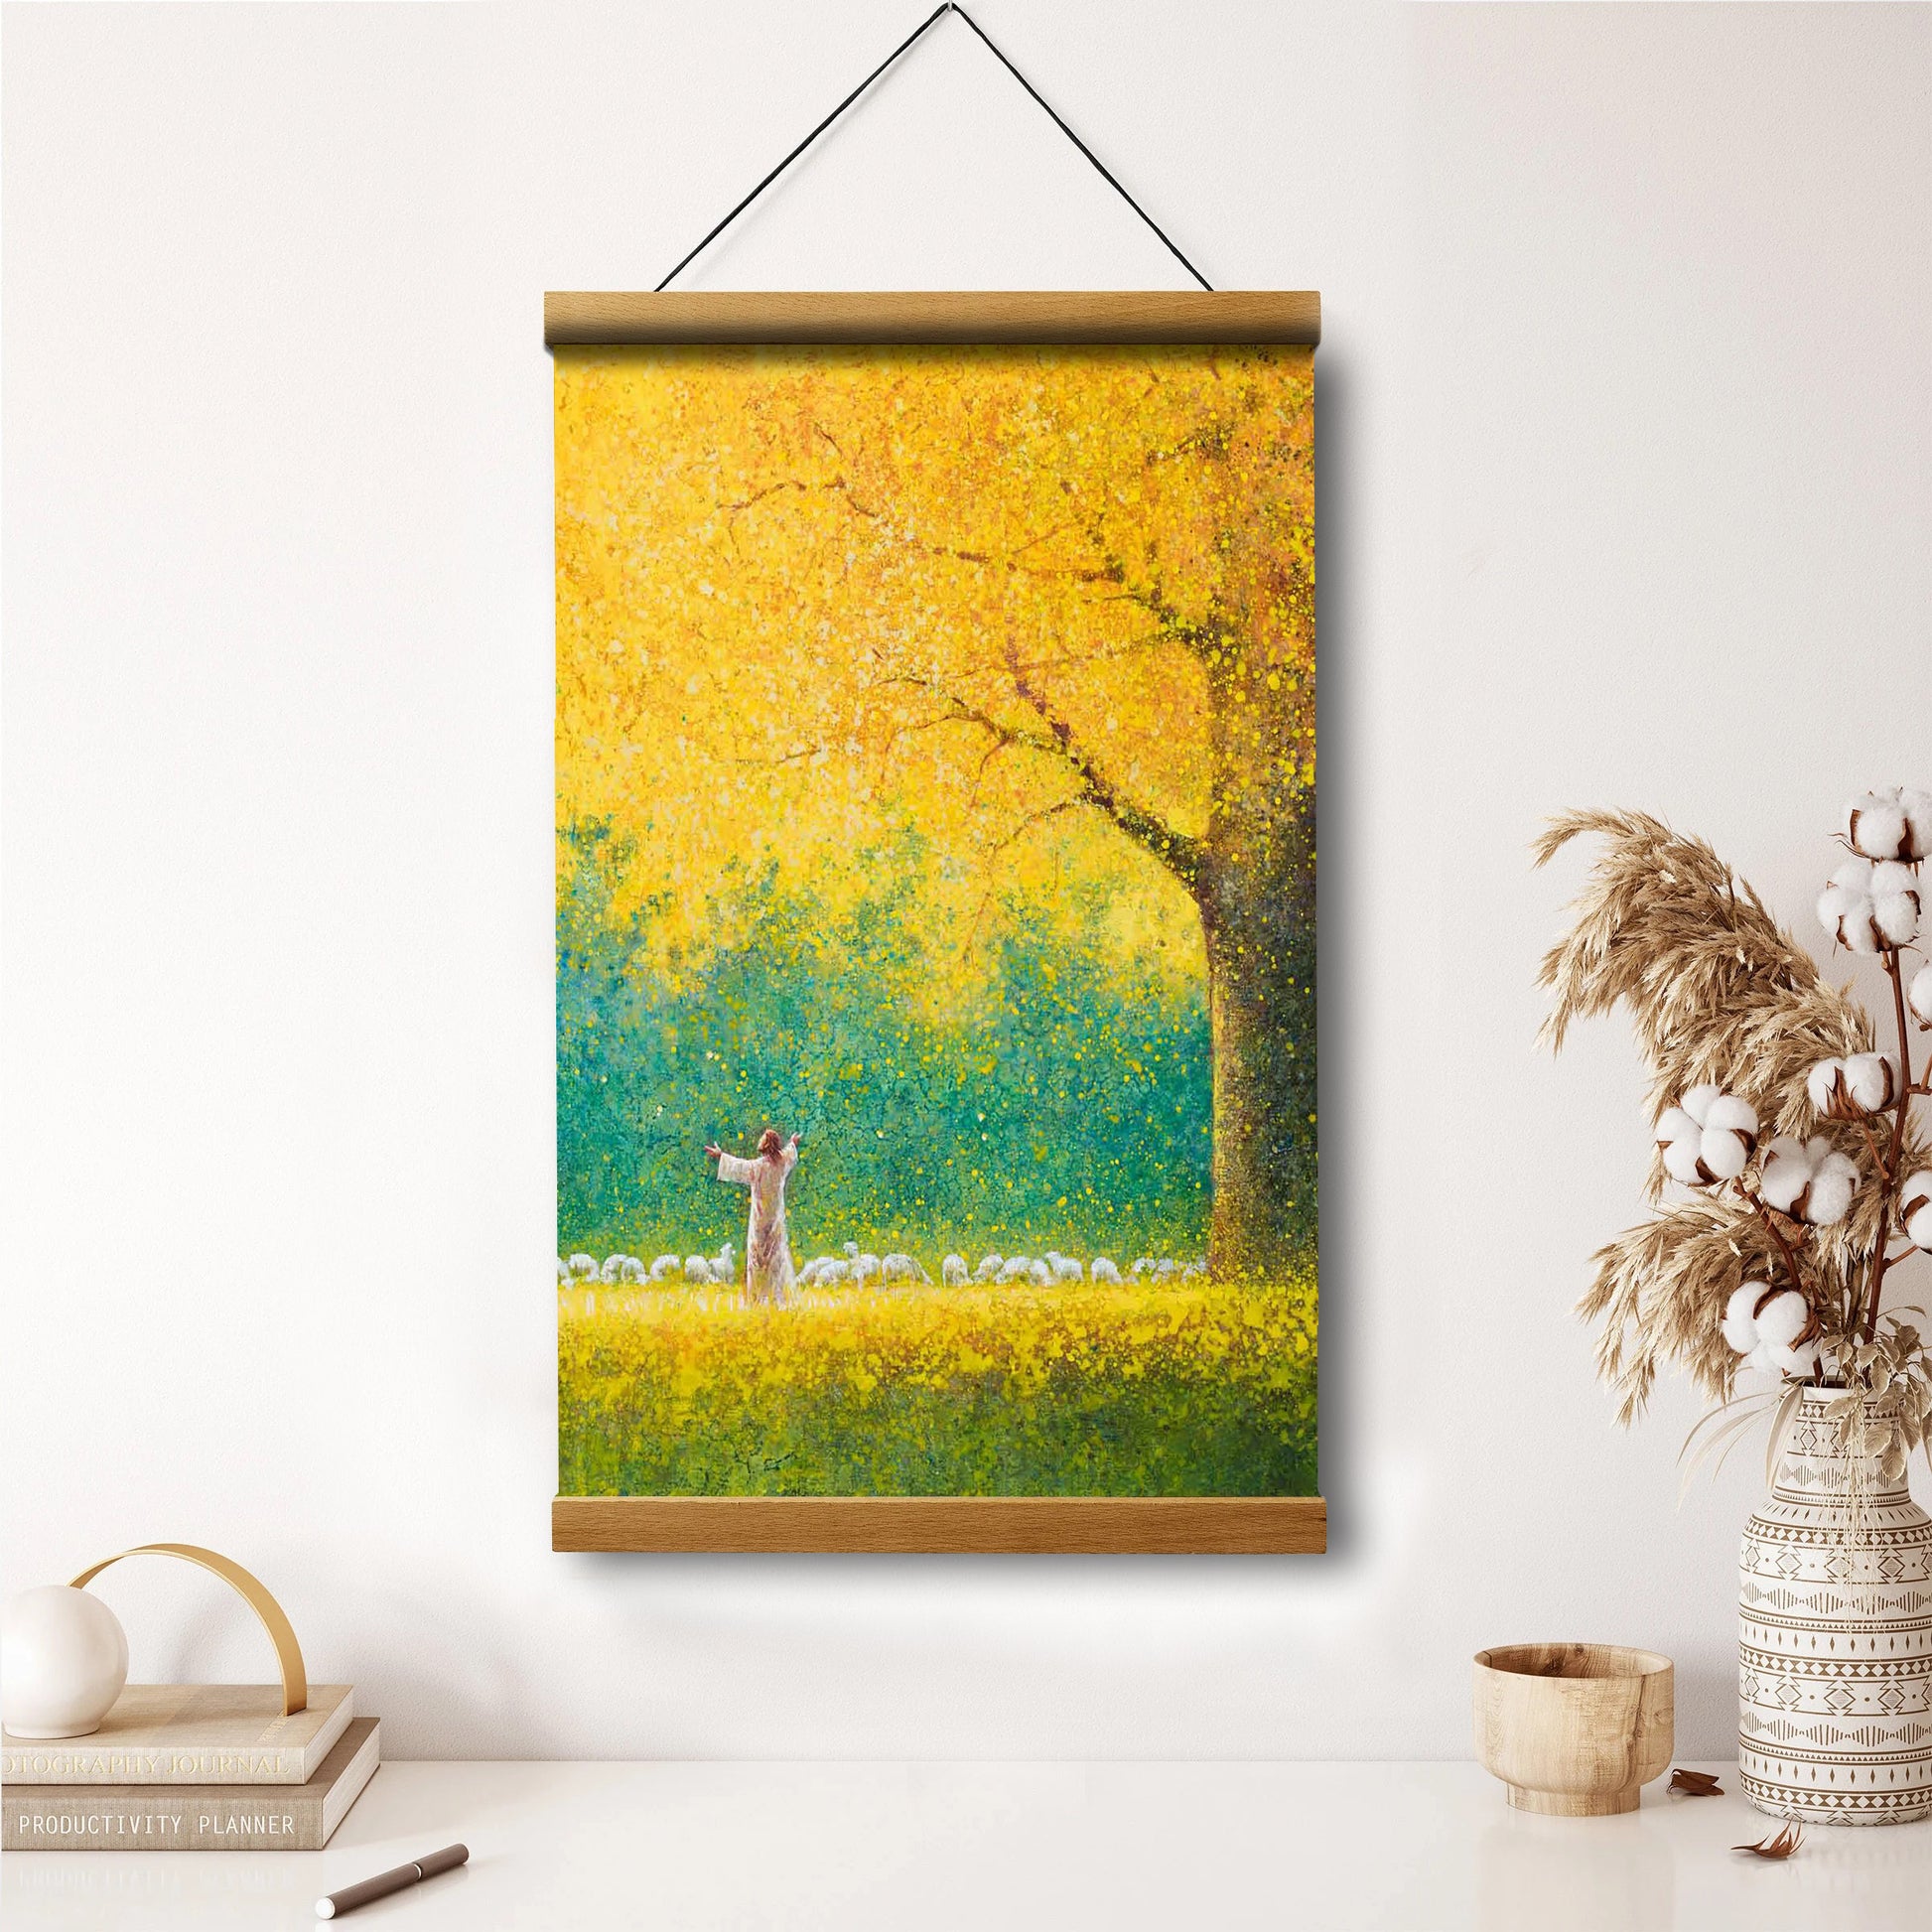 Jesus And The Lamb Picture - Sunshine In My Soul Portrait Hanging Canvas Wall Art - Christian Wall Decor - Religious Canvas